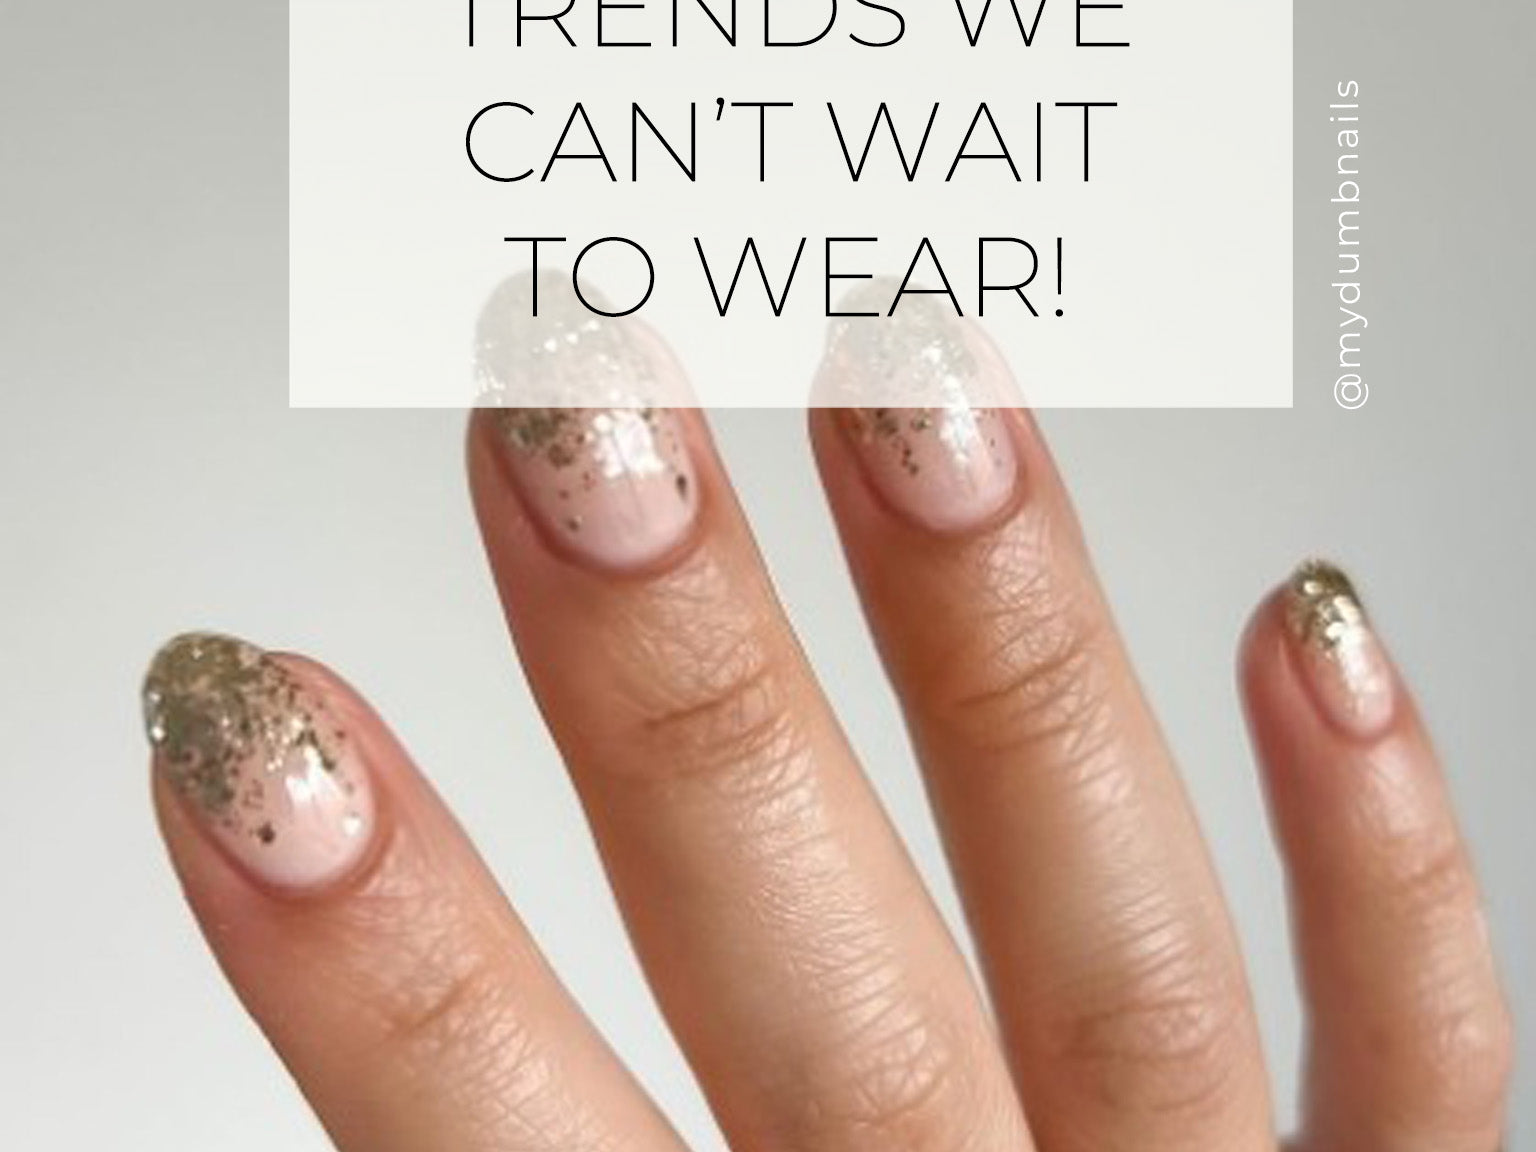 5 Holiday Nail Trends We Can’t Wait to Wear!